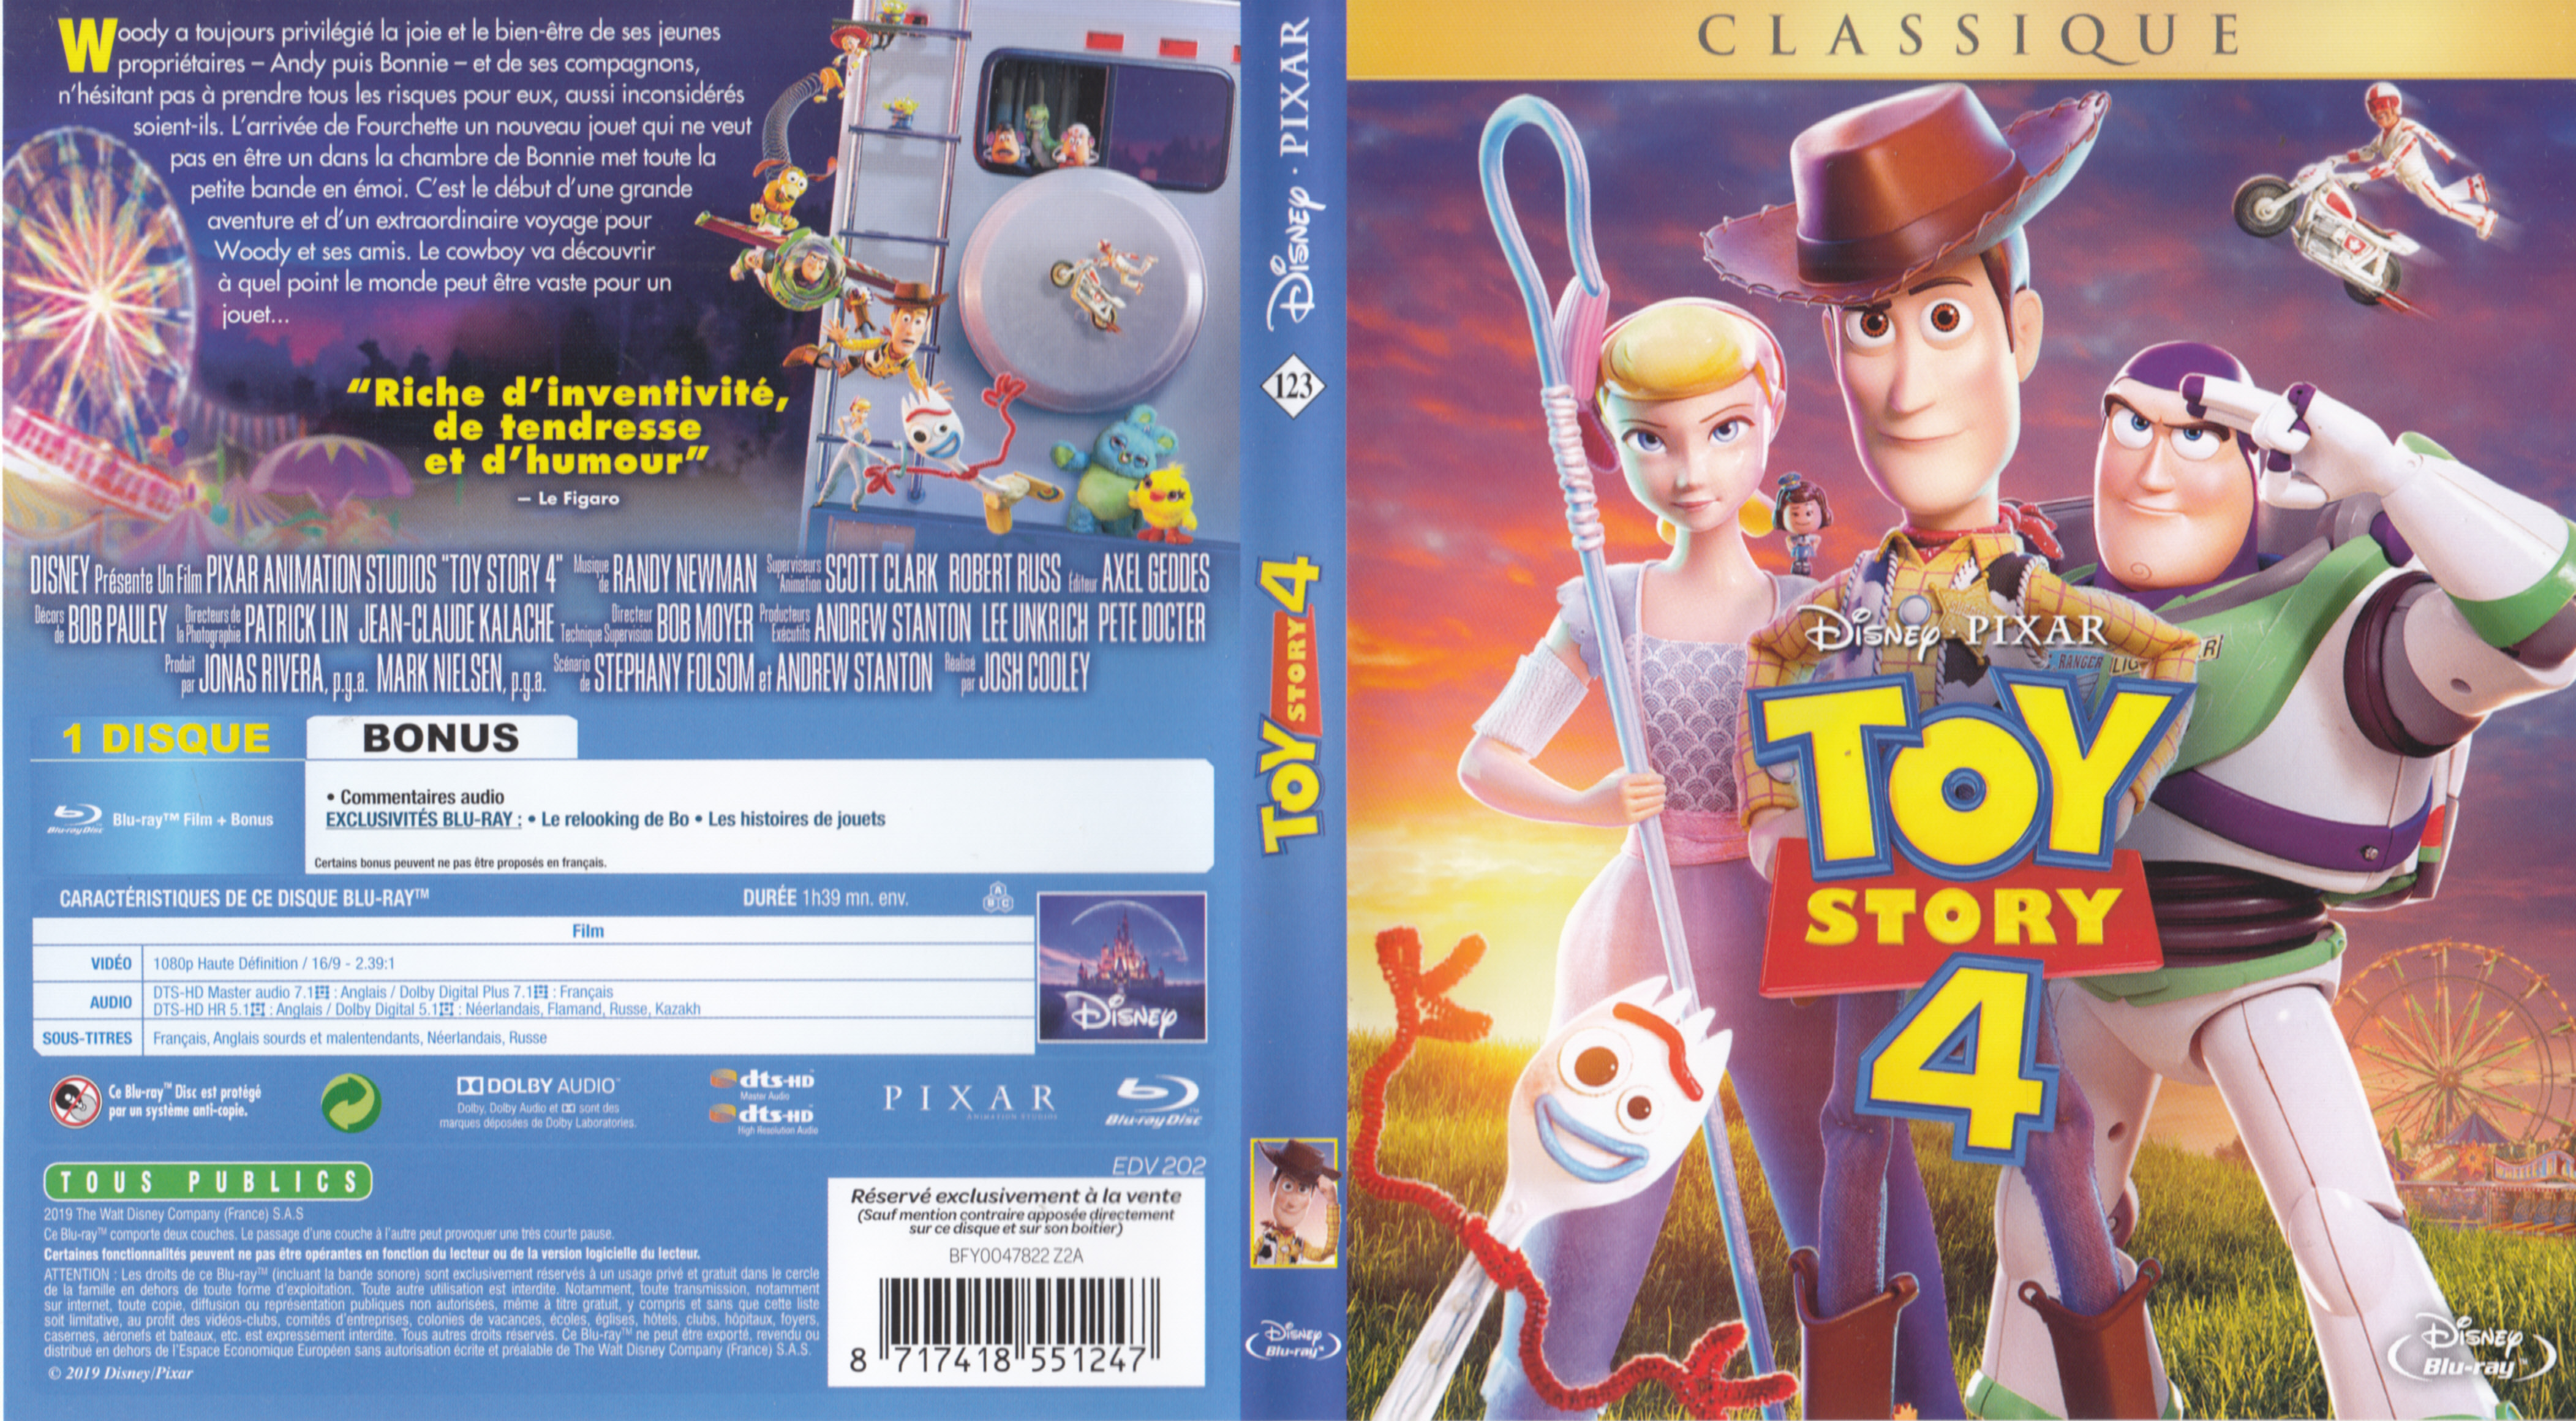 Jaquette DVD Toy story 4 (BLU-RAY) v2